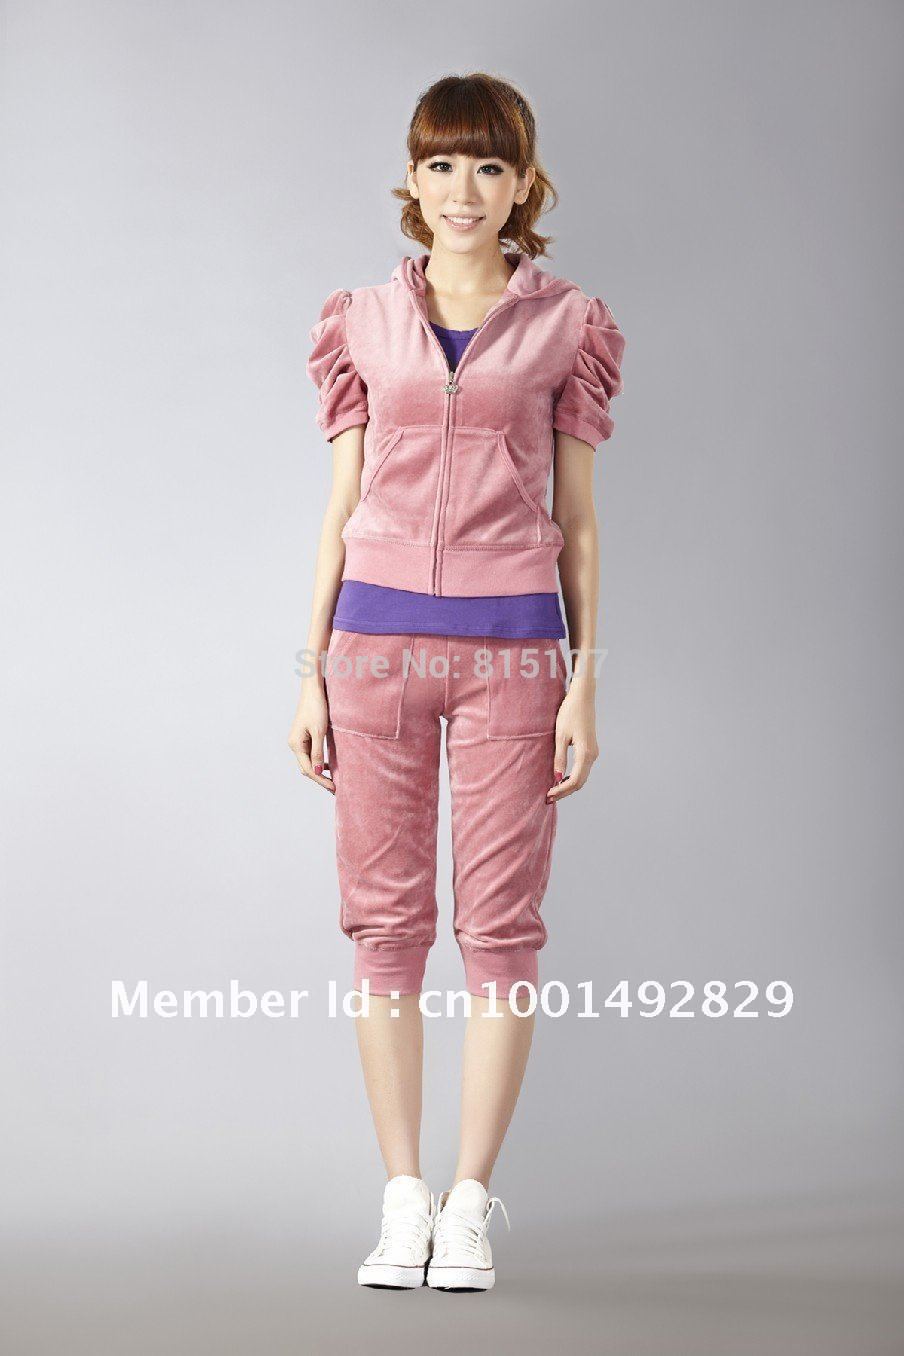 Download this Sport Women Clothing... picture